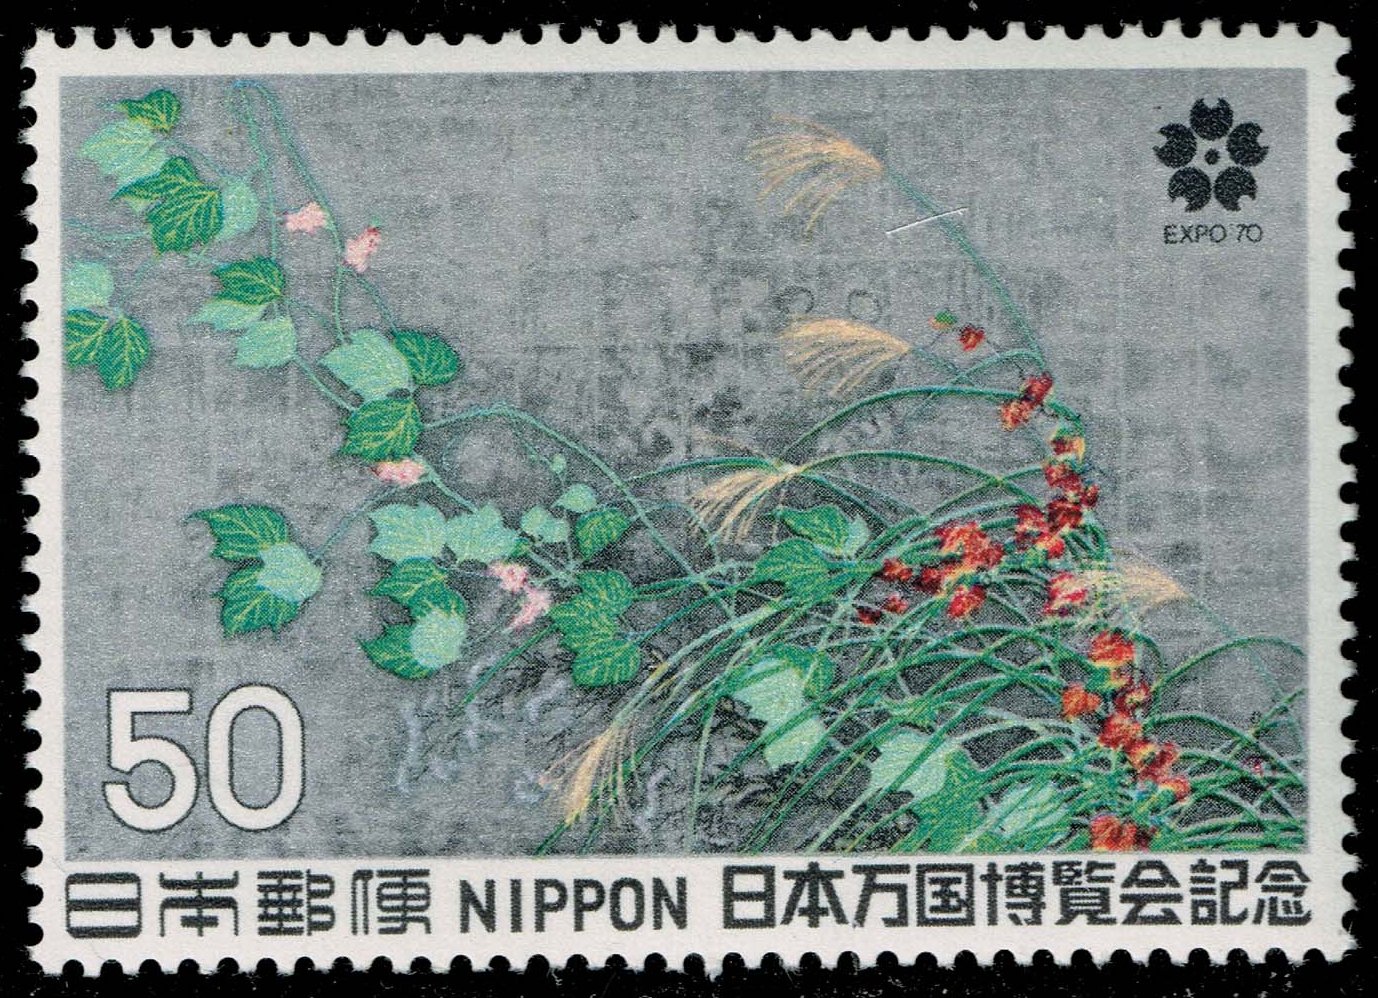 Japan #1031 Grass in Autumn Wind; MNH - Click Image to Close